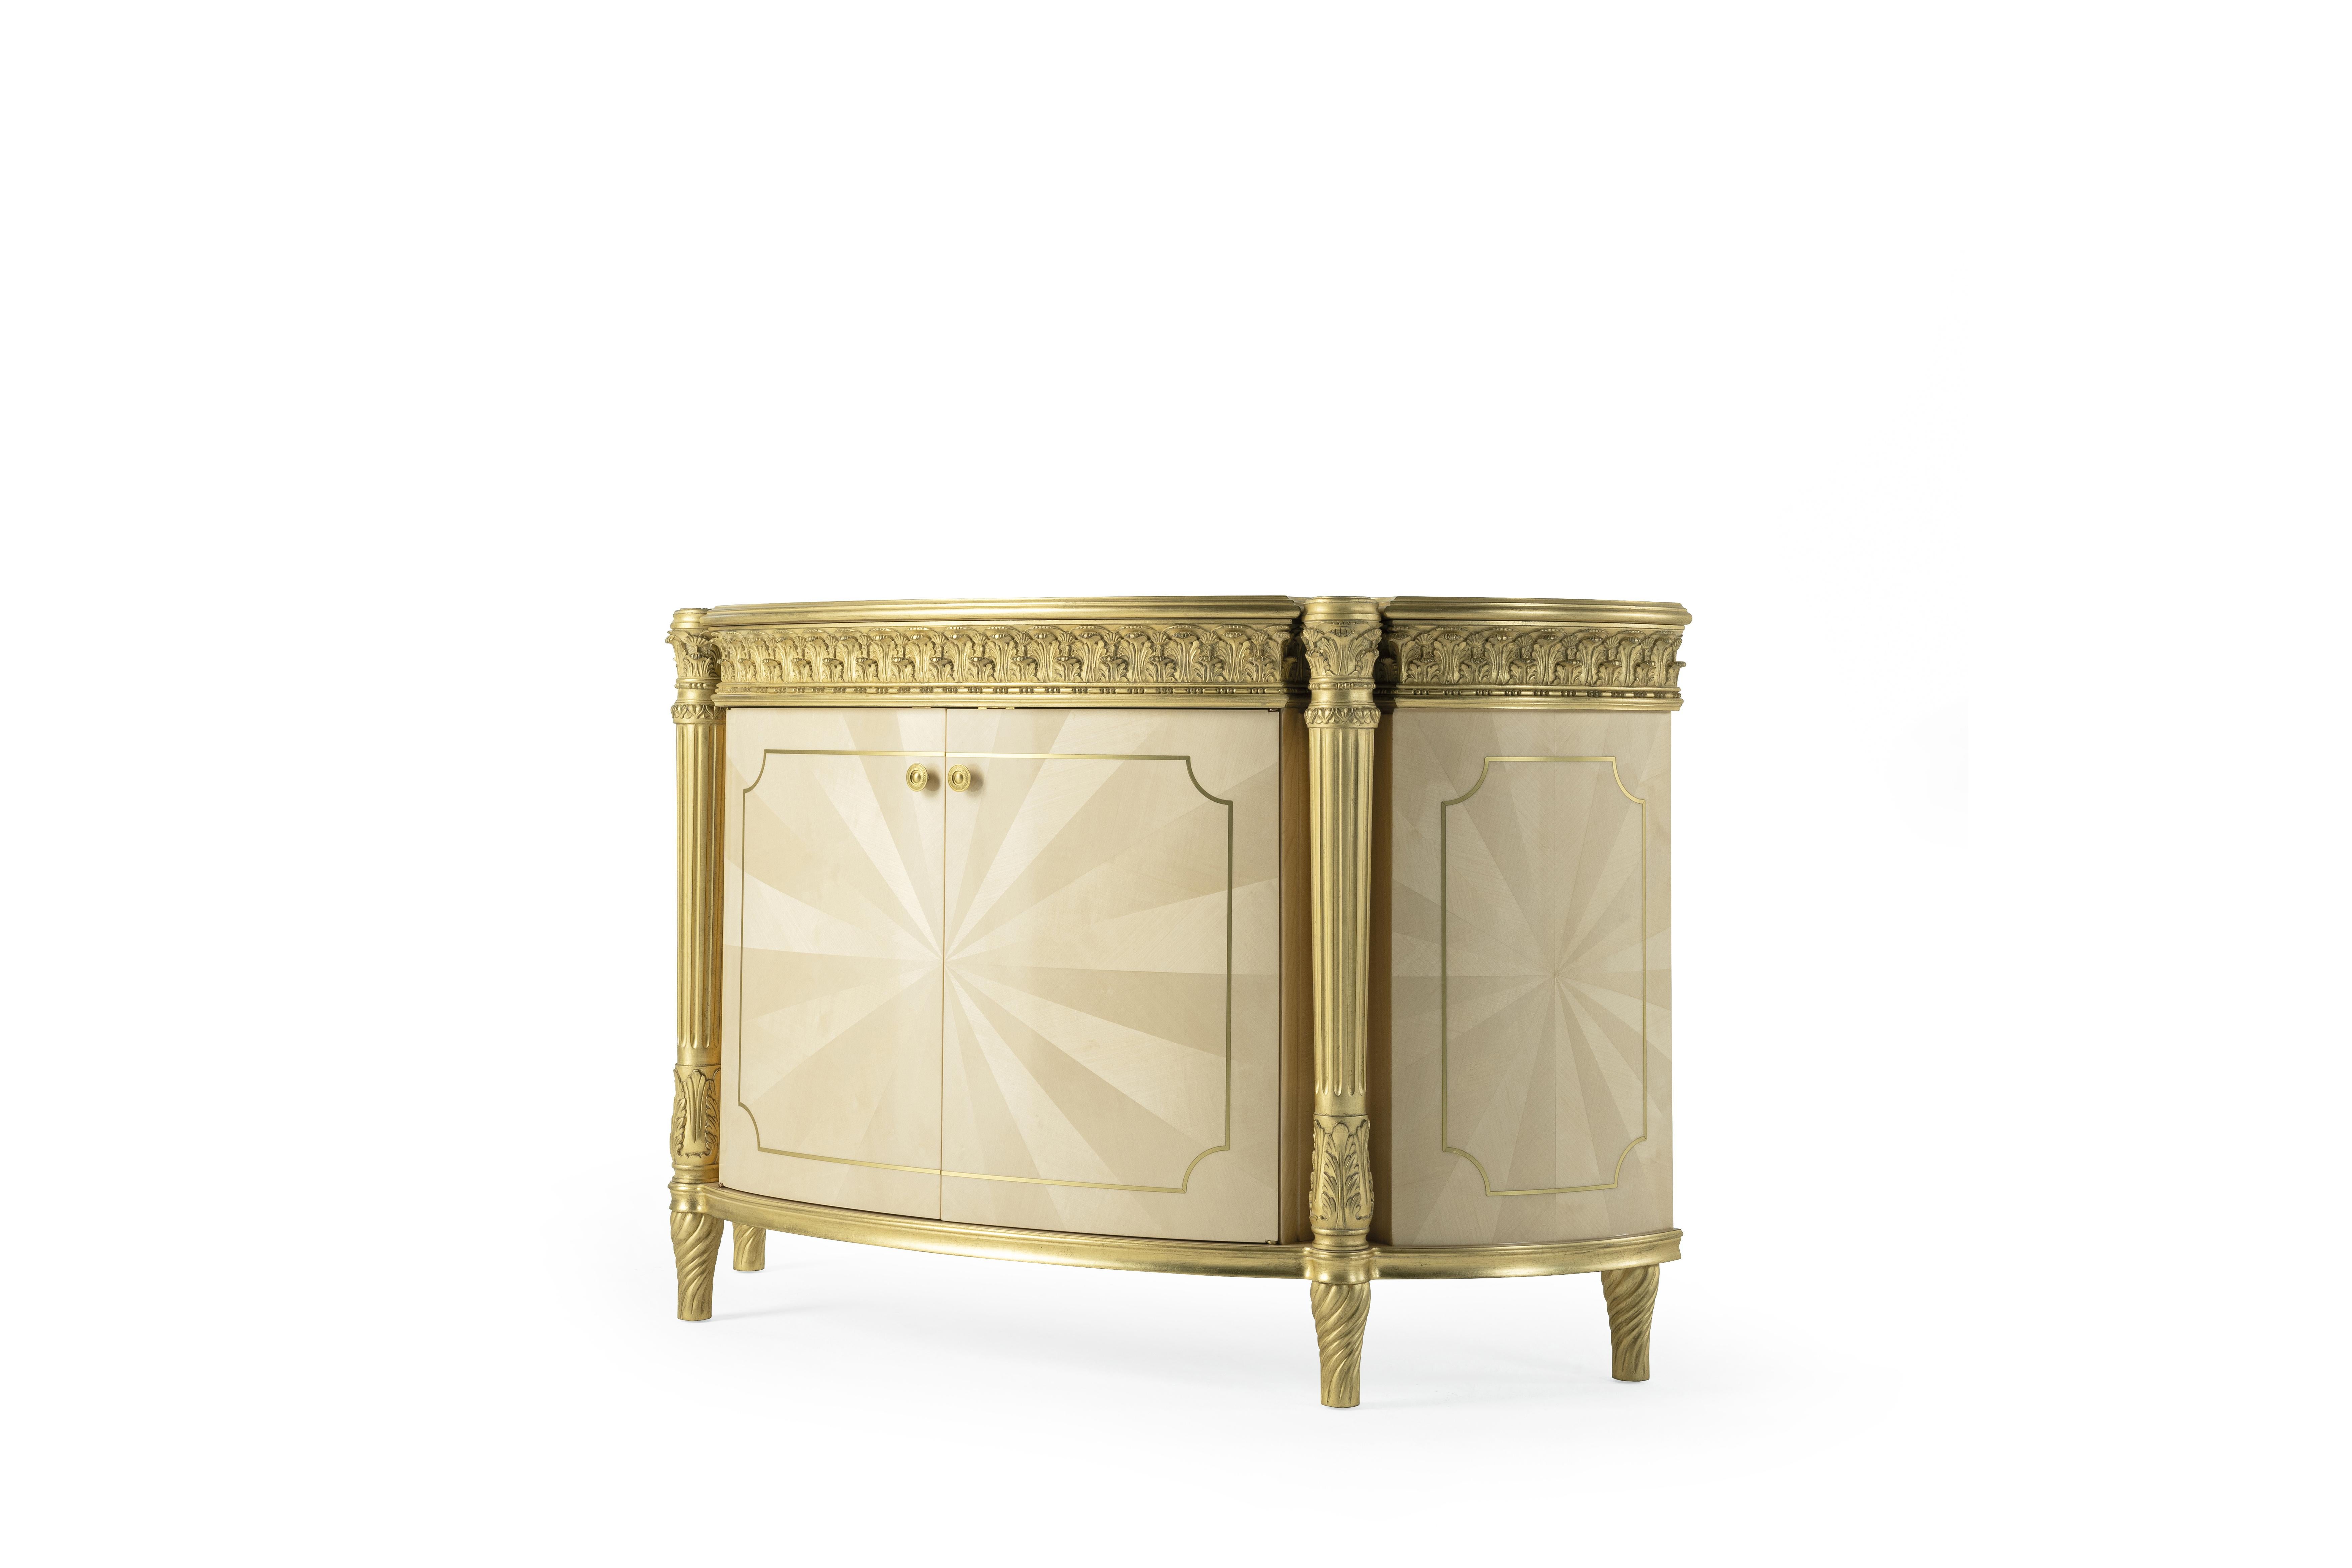 All the splendor of the French style in the Boulevard collection, featuring the presence of hand-made carvings, embellished with gold leaf finishing. The protagonist is frisé maple wood, with ray-of-sunshine inlays and brass inserts. Boulevard looks